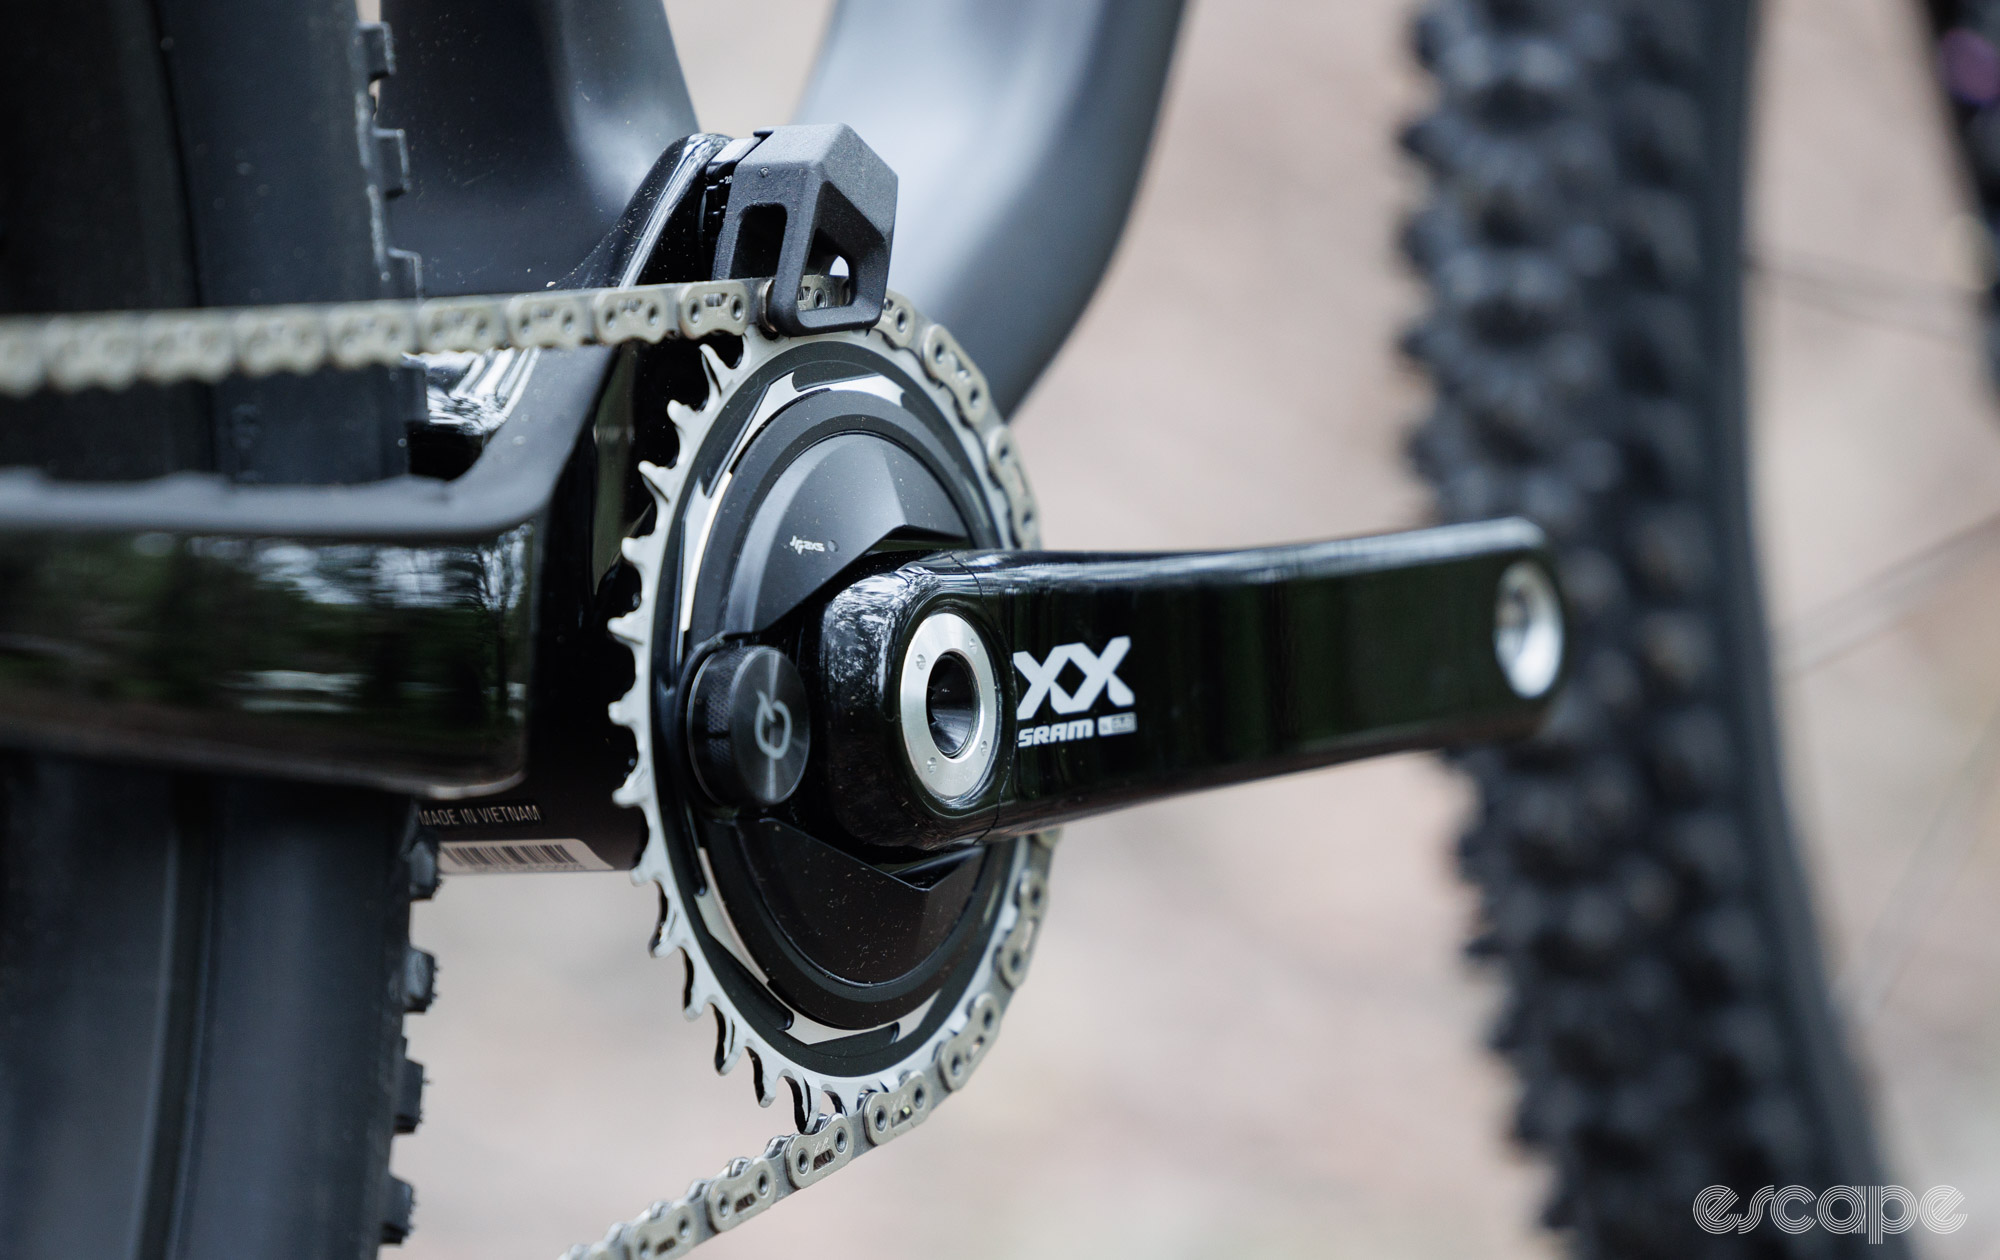 A close up of the SRAM XX SL crankset and integrated chain guide. 